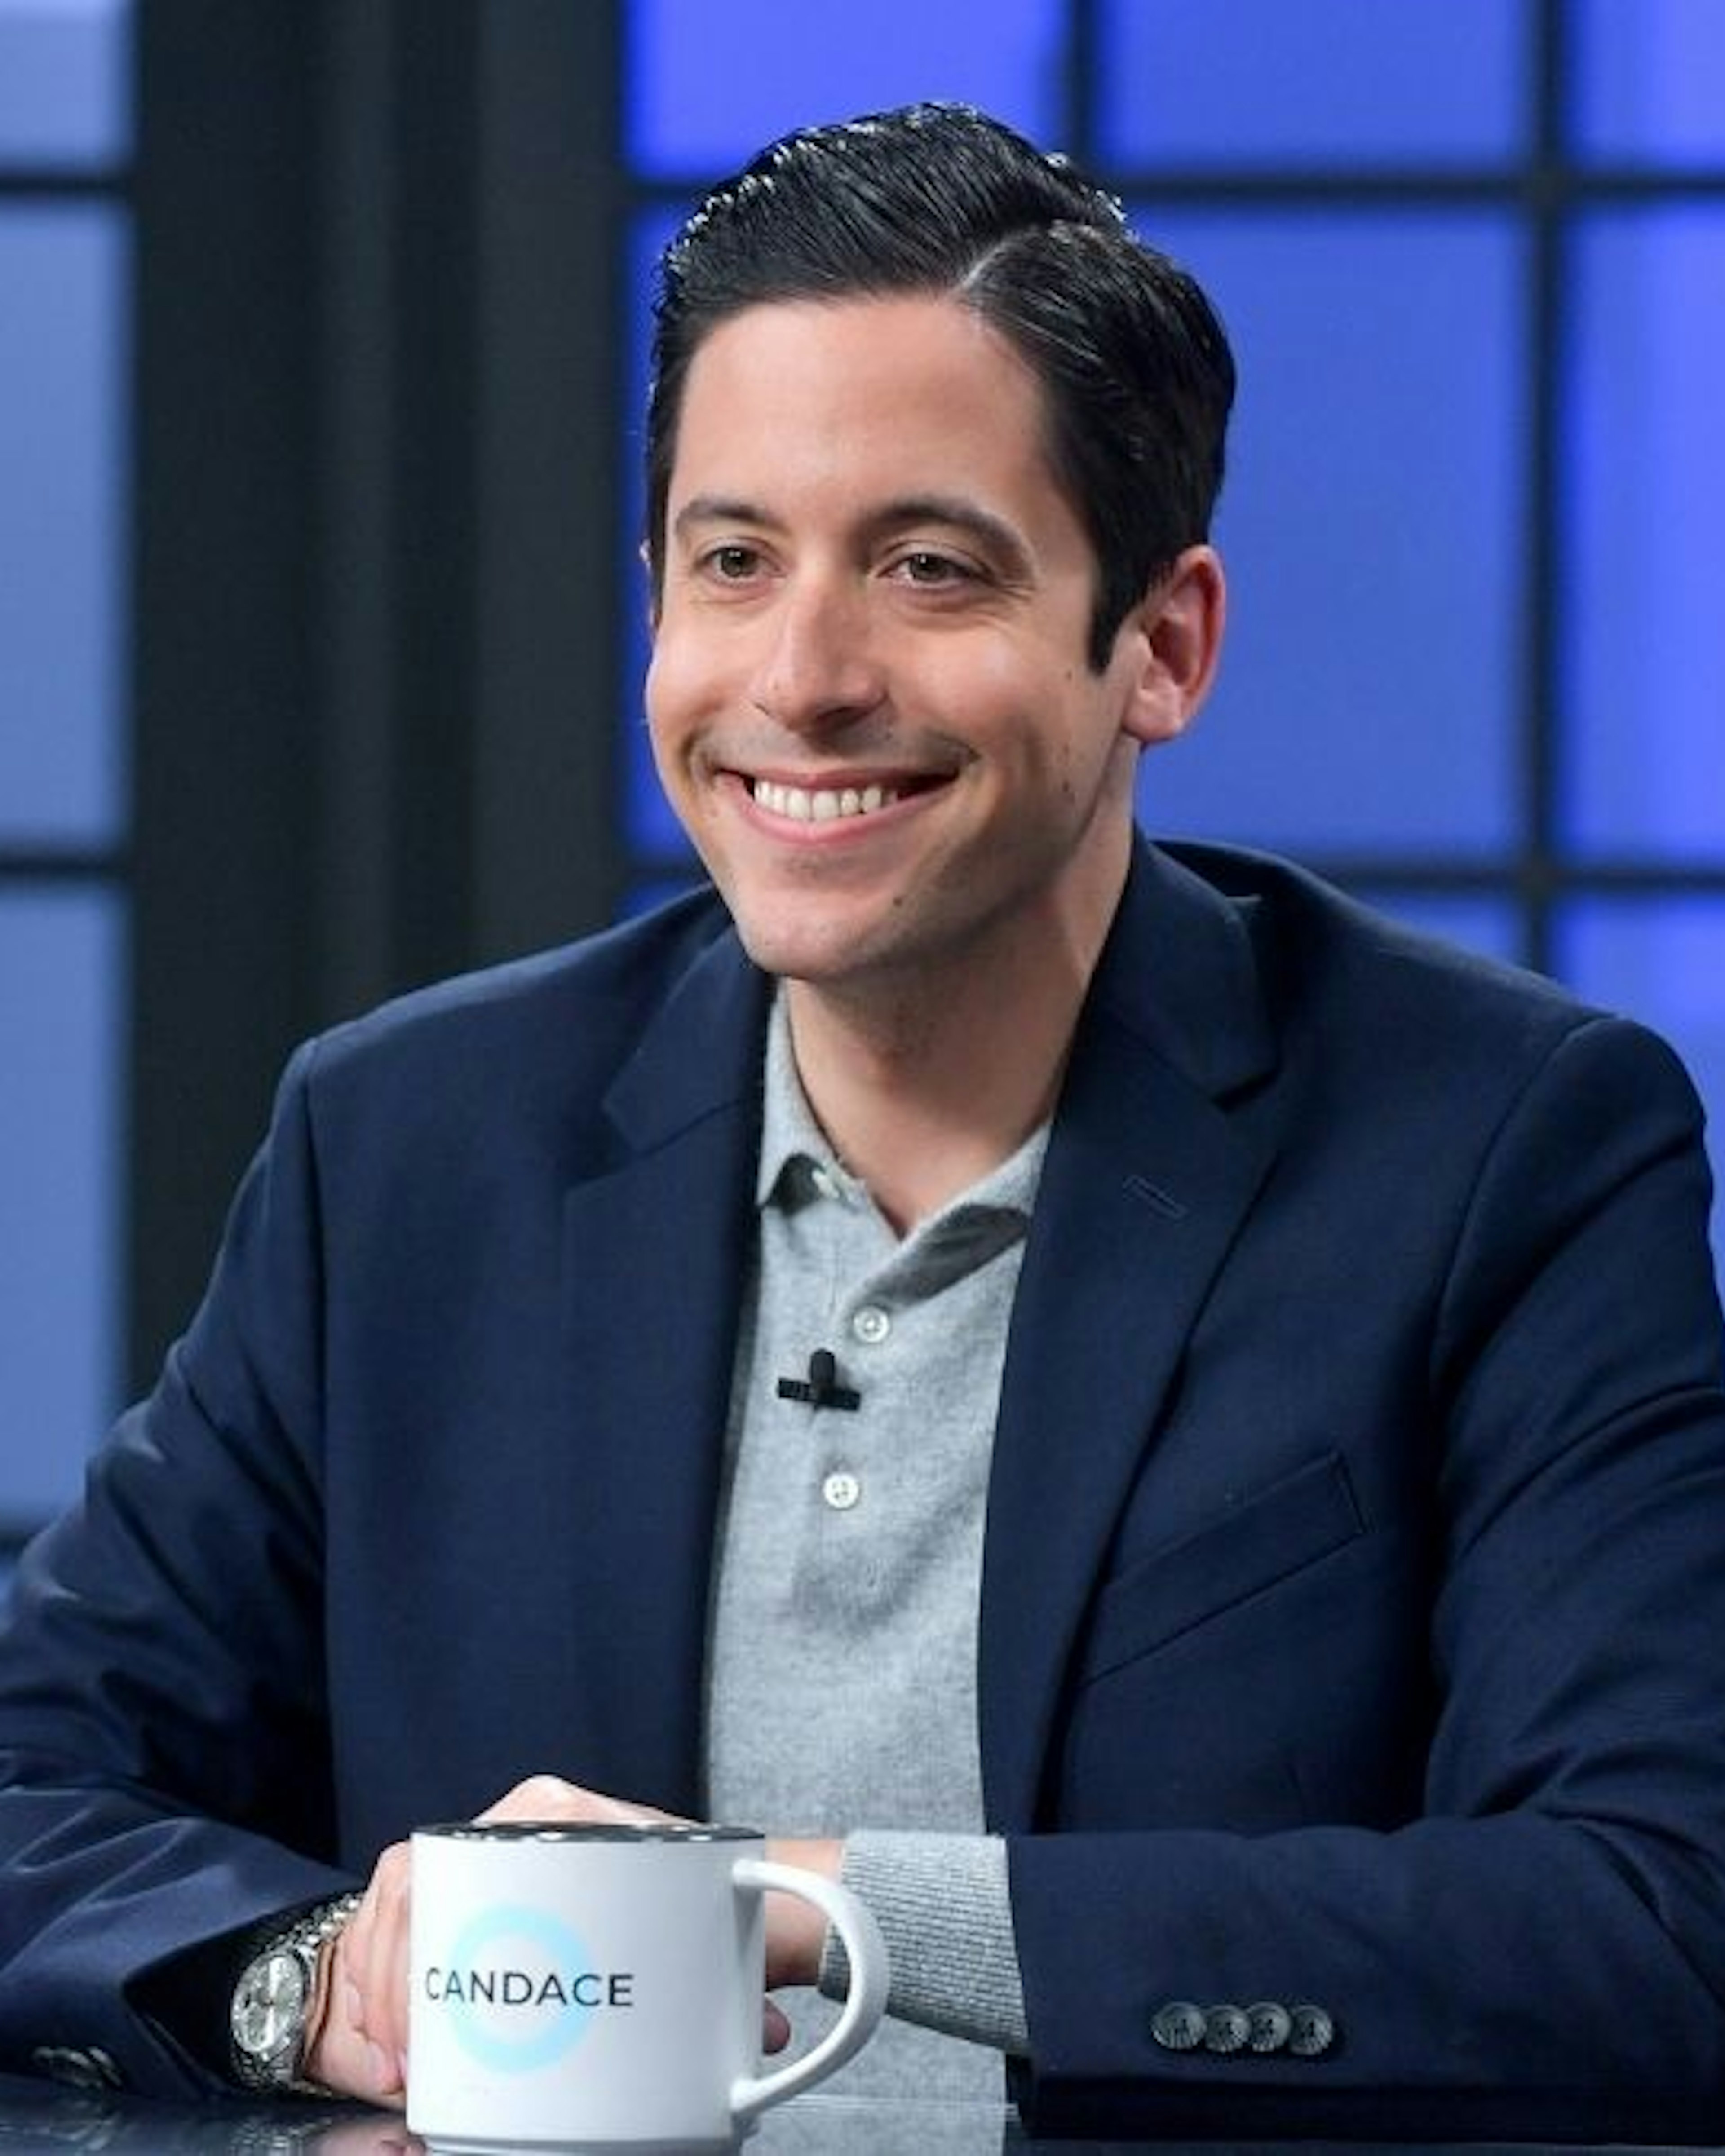 Michael Knowles is seen on set of "Candace" on April 19, 2022 in Nashville, Tennessee.